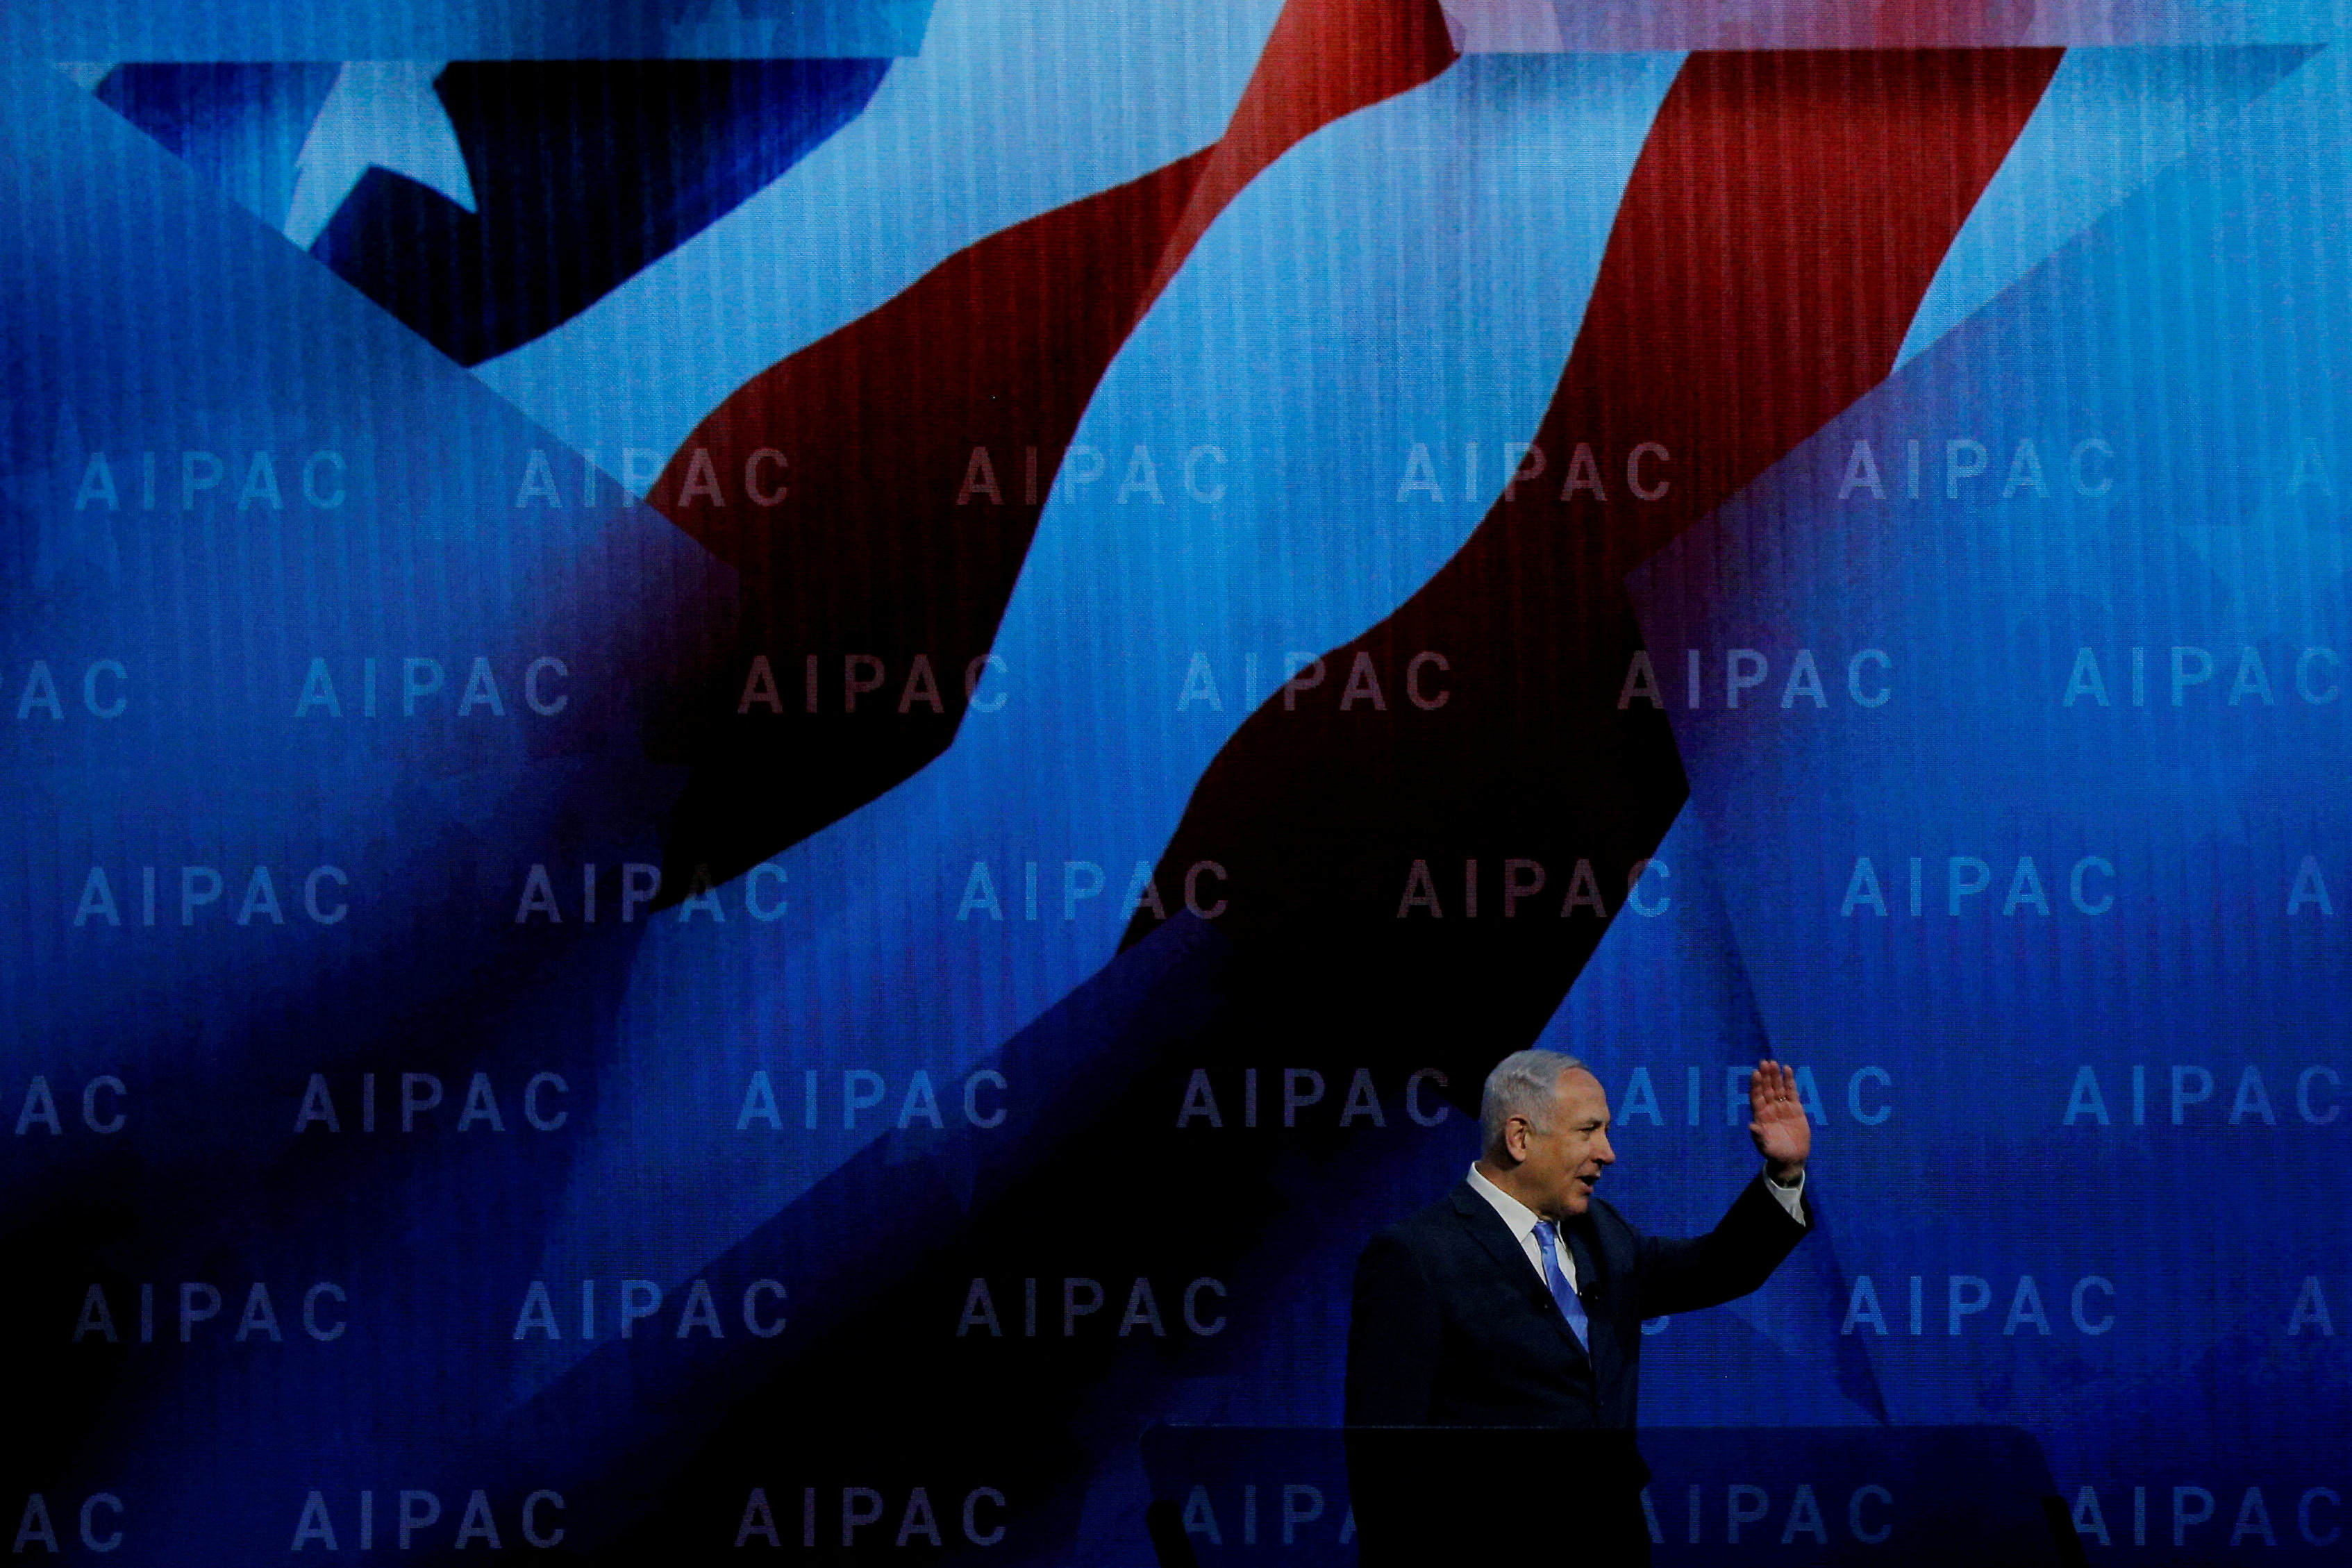 Israeli Prime Minister Benjamin Netanyahu speaks at the AIPAC policy conference in Washington